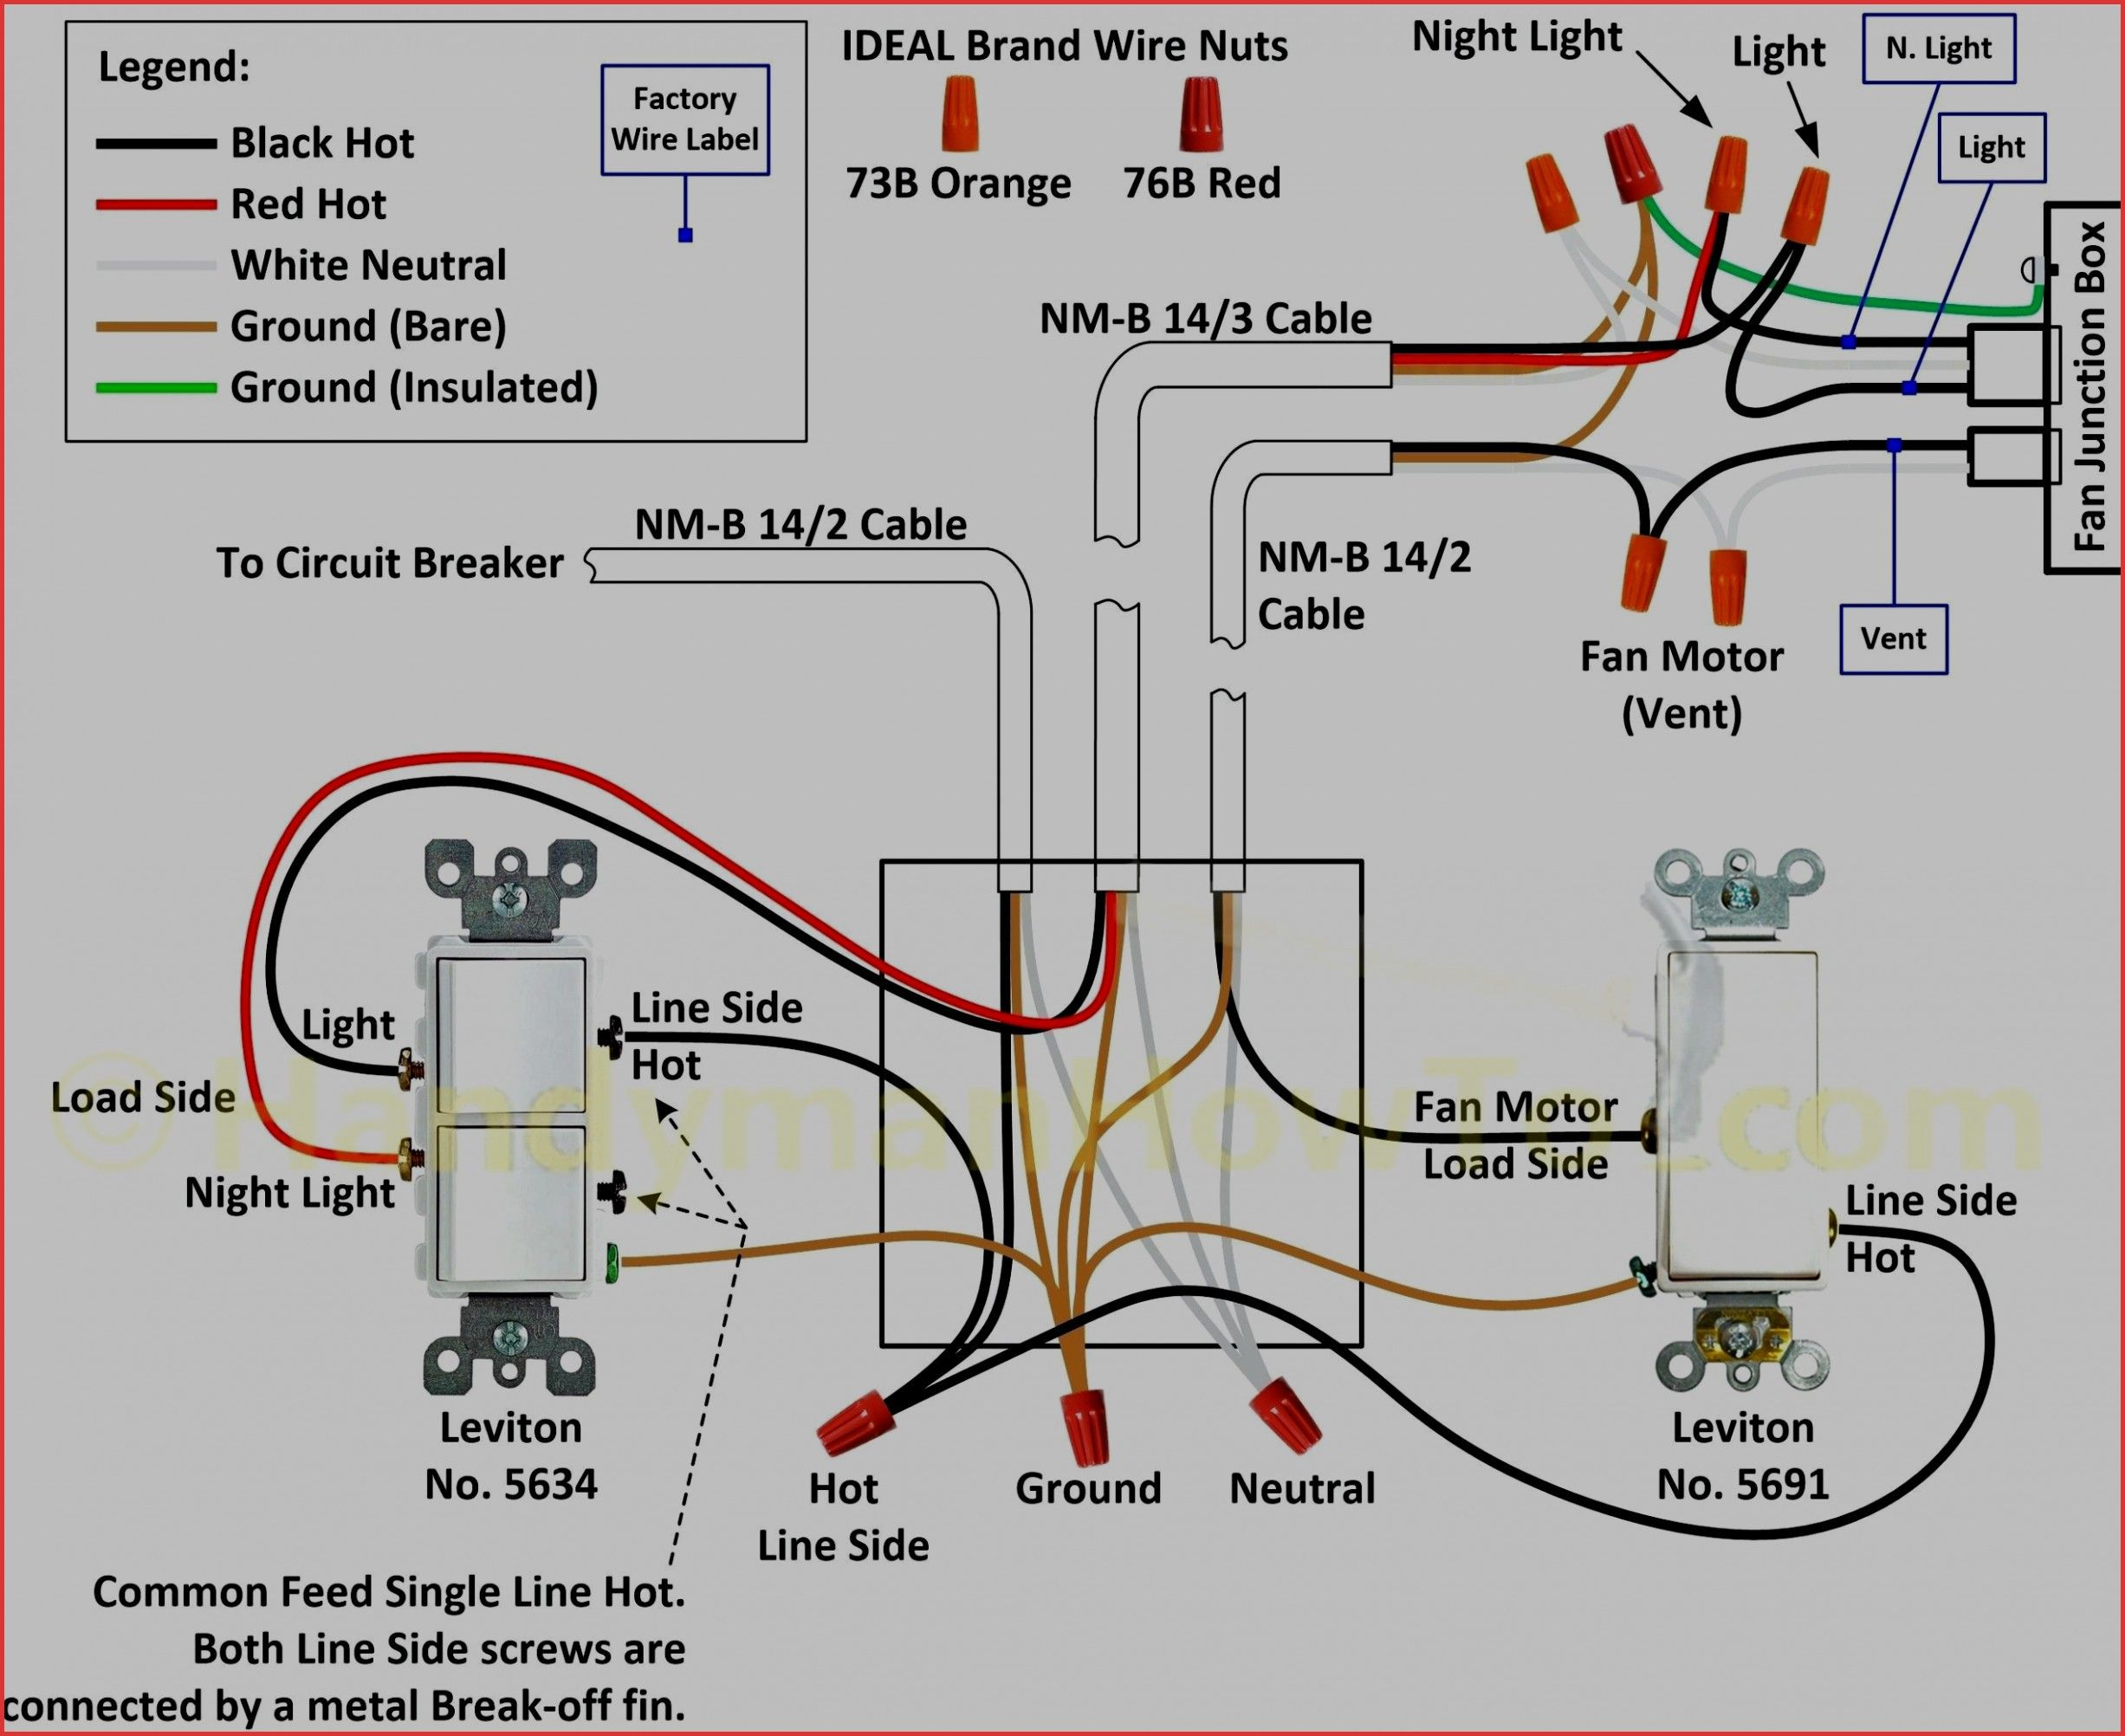 Unique Wiring Diagram For 3 Gang Dimmer Switch Light intended for proportions 2453 X 2004